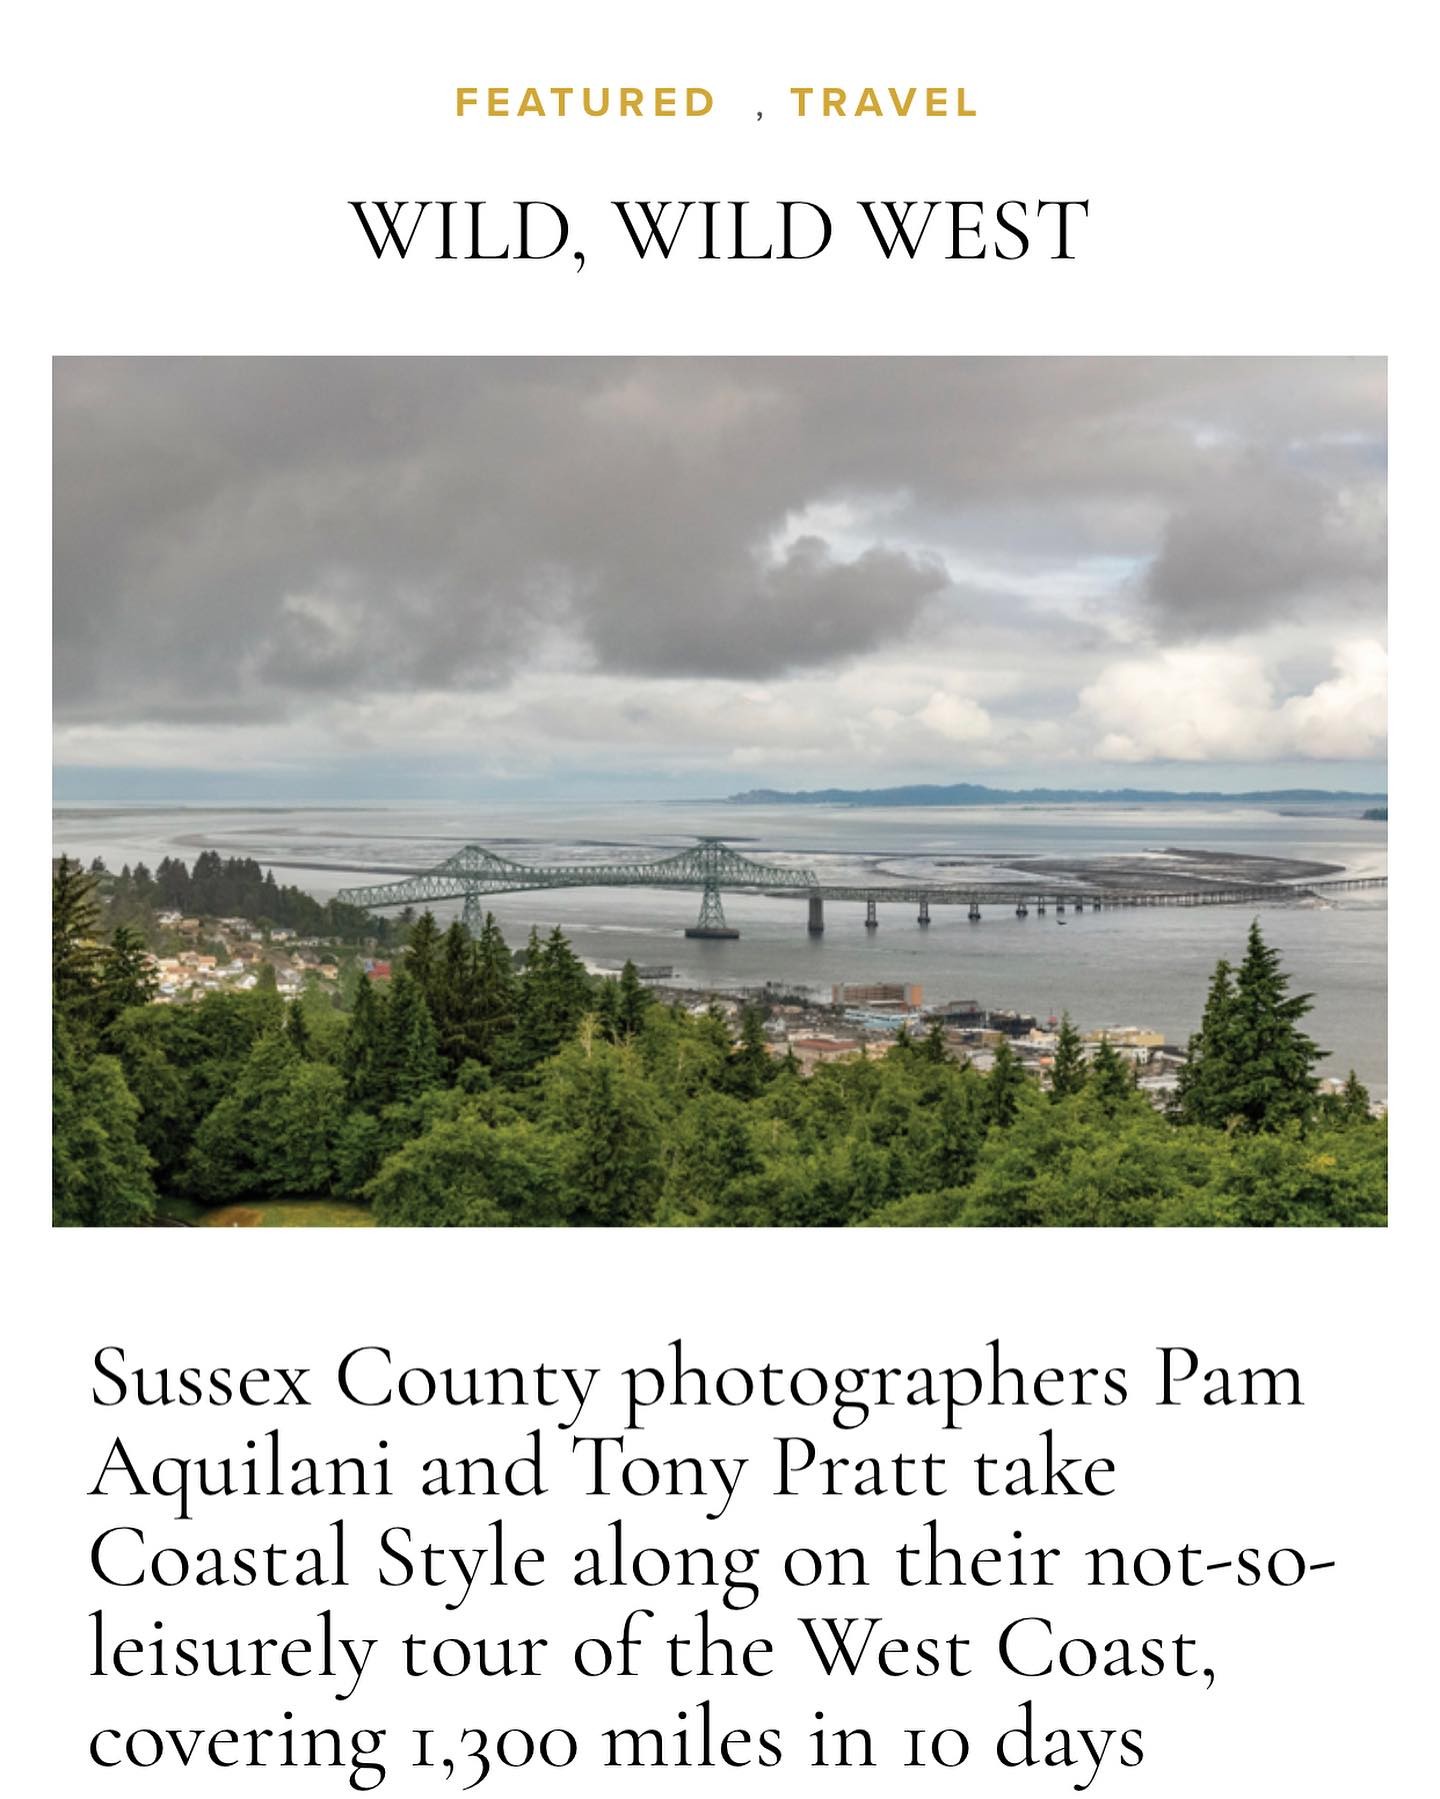 *link in bio* Check out this months Travel Feature in @coastalstylemag! It recaps our ten day west coast road trip from the Columbia River to San Francisco. Story written by my very talented husband @tprattde 

https://coastalstylemag.com/wild-wild-west/

#travelphotography #westcoast #roadtrip #dowhatyoulove #travelmore